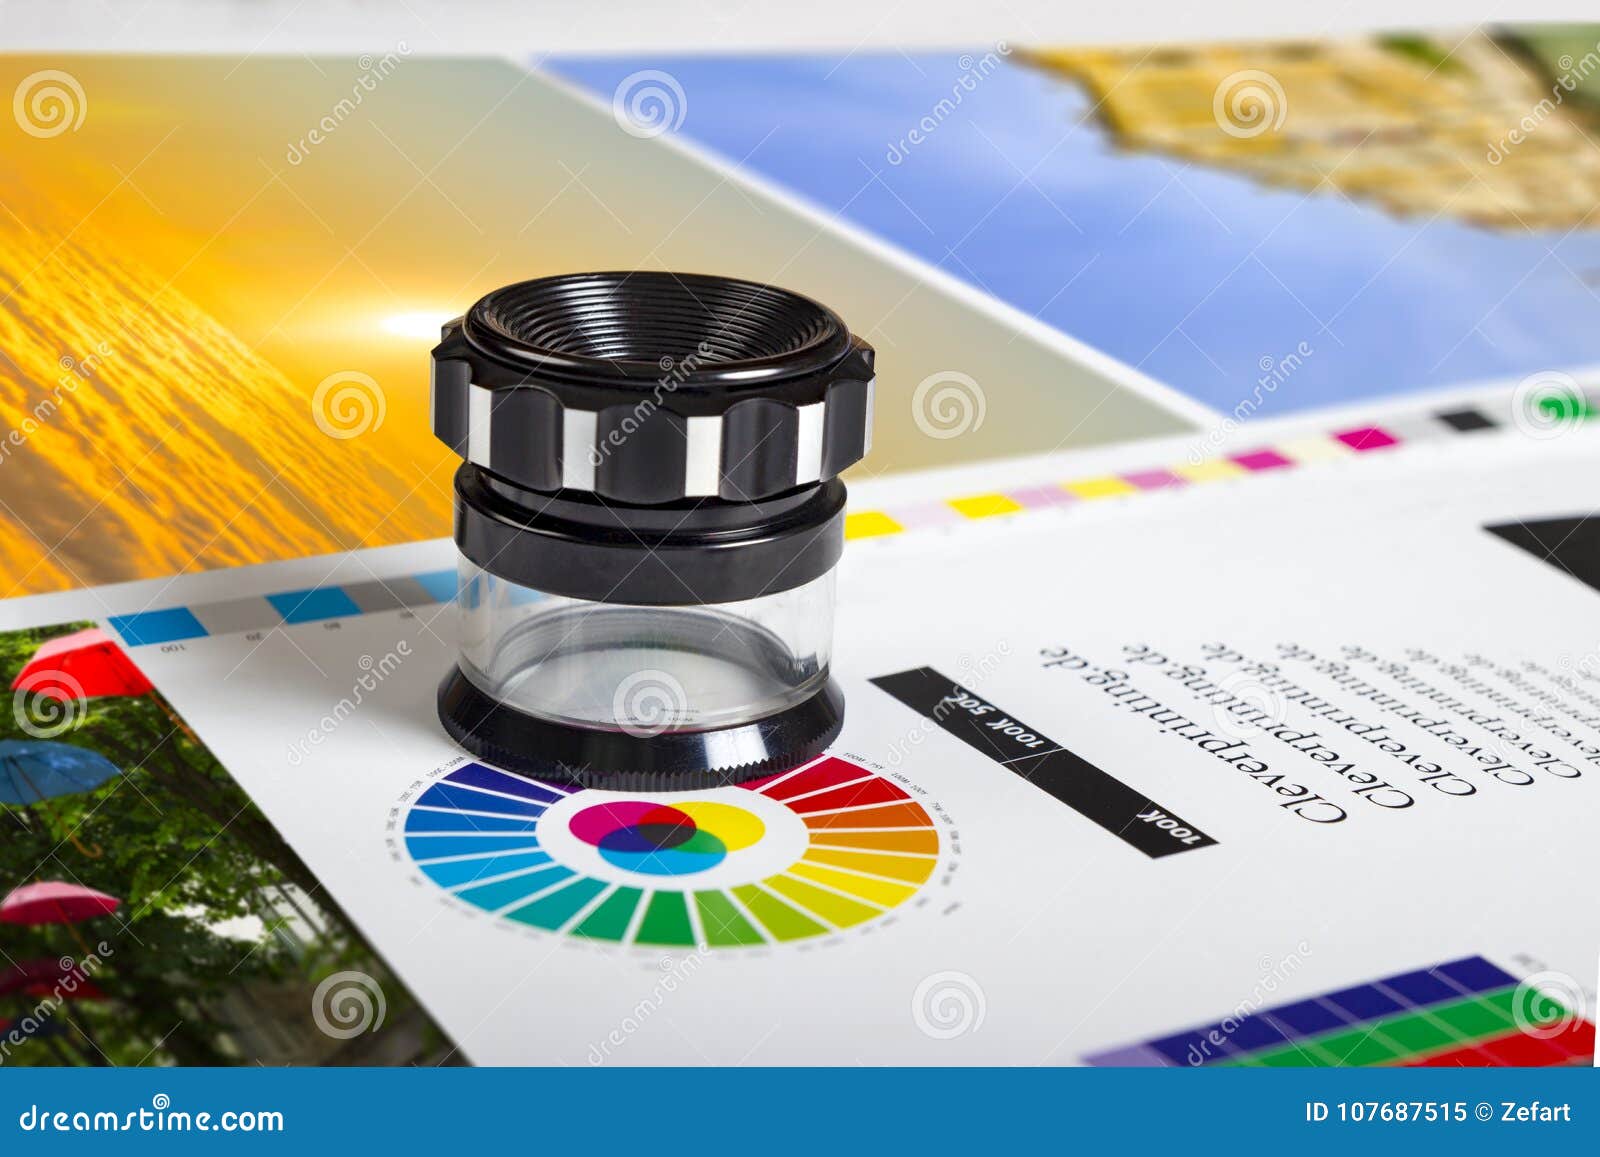 print loupe on offset printed sheet with basic colors